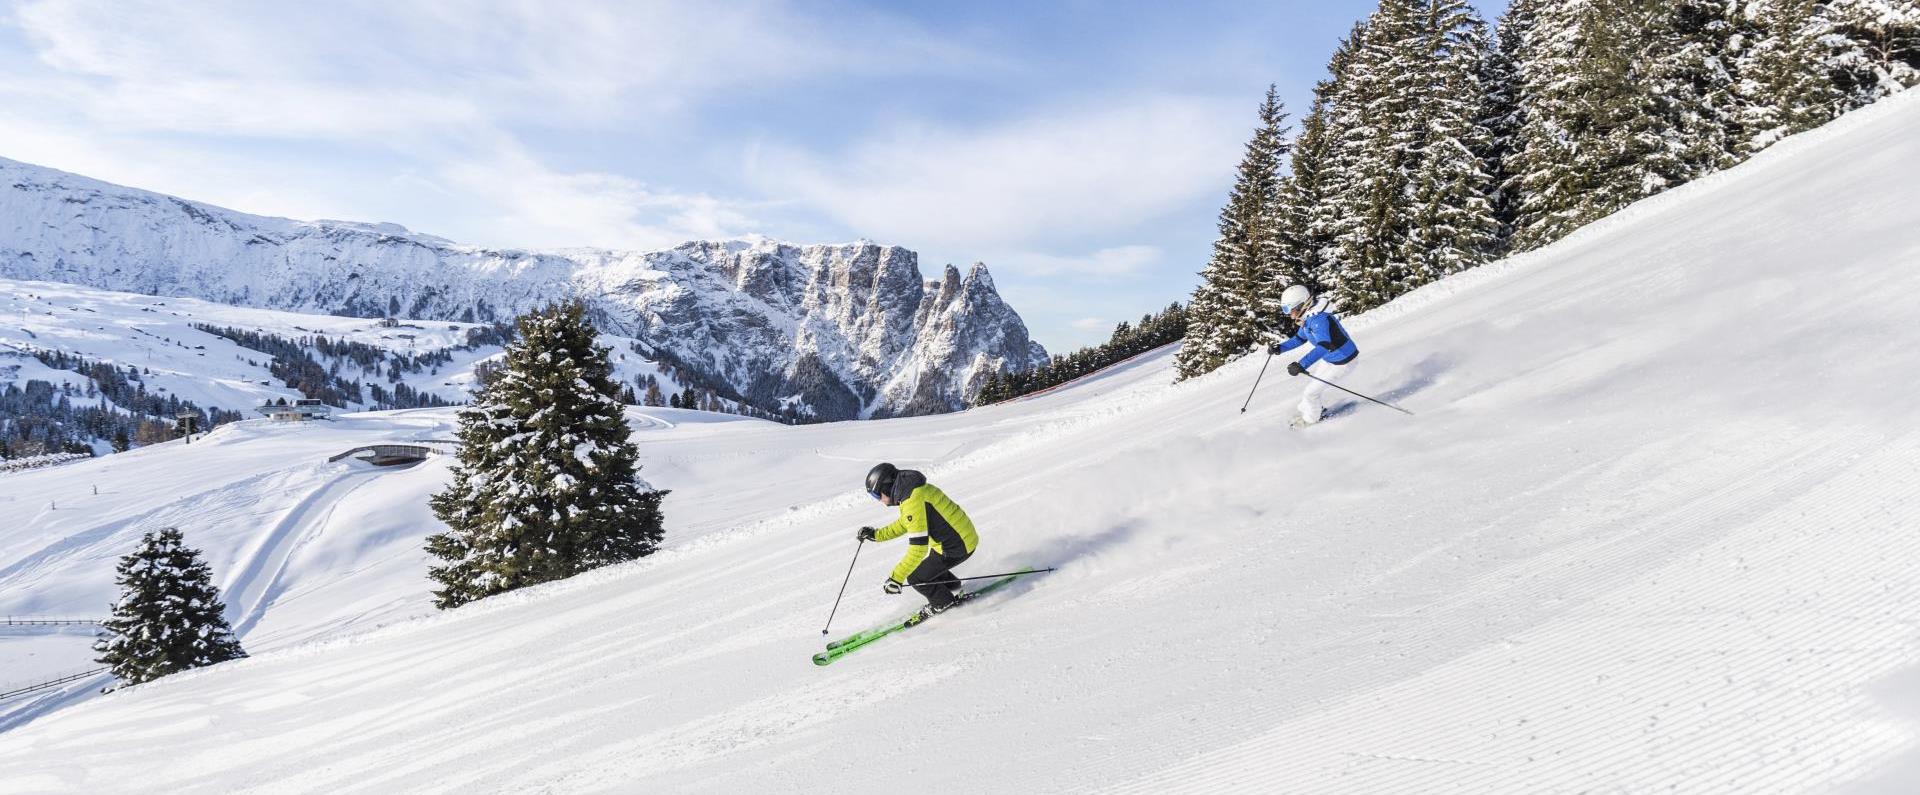 Skiing holiday on the Seiser Alm with panoramic view of the Dolomites